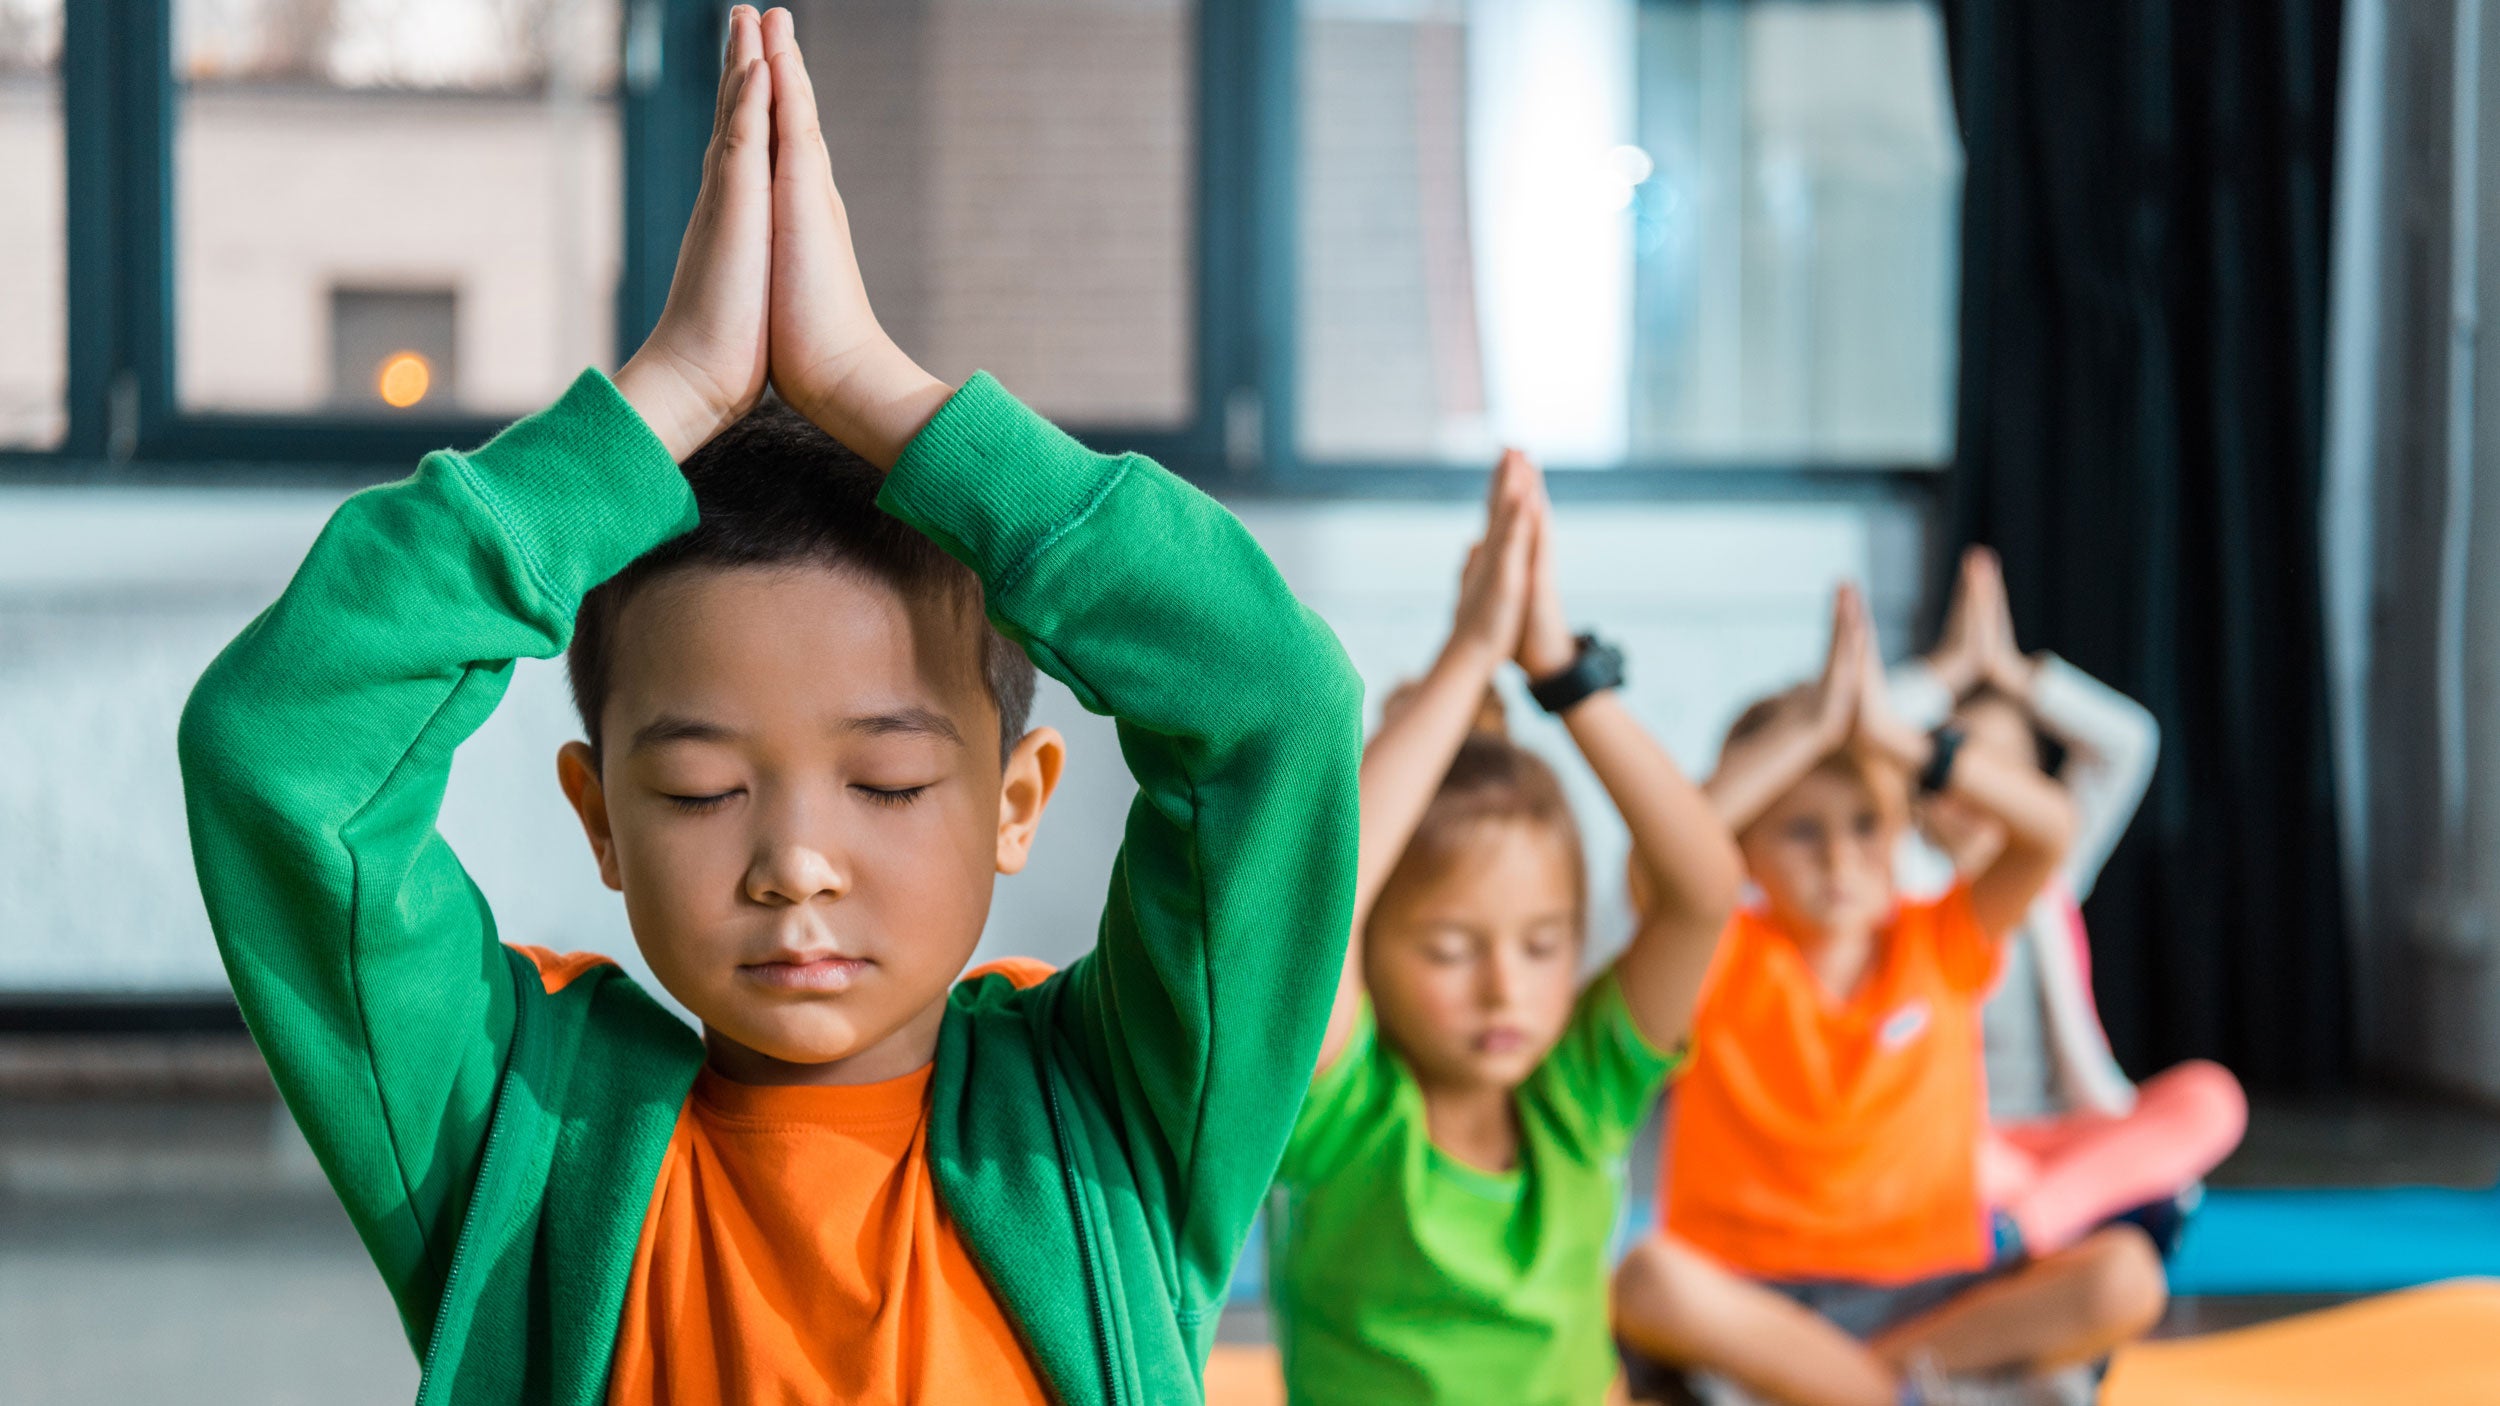 Teaching Yoga for Kids: Why Kids Need Yoga as Much as Adults Do